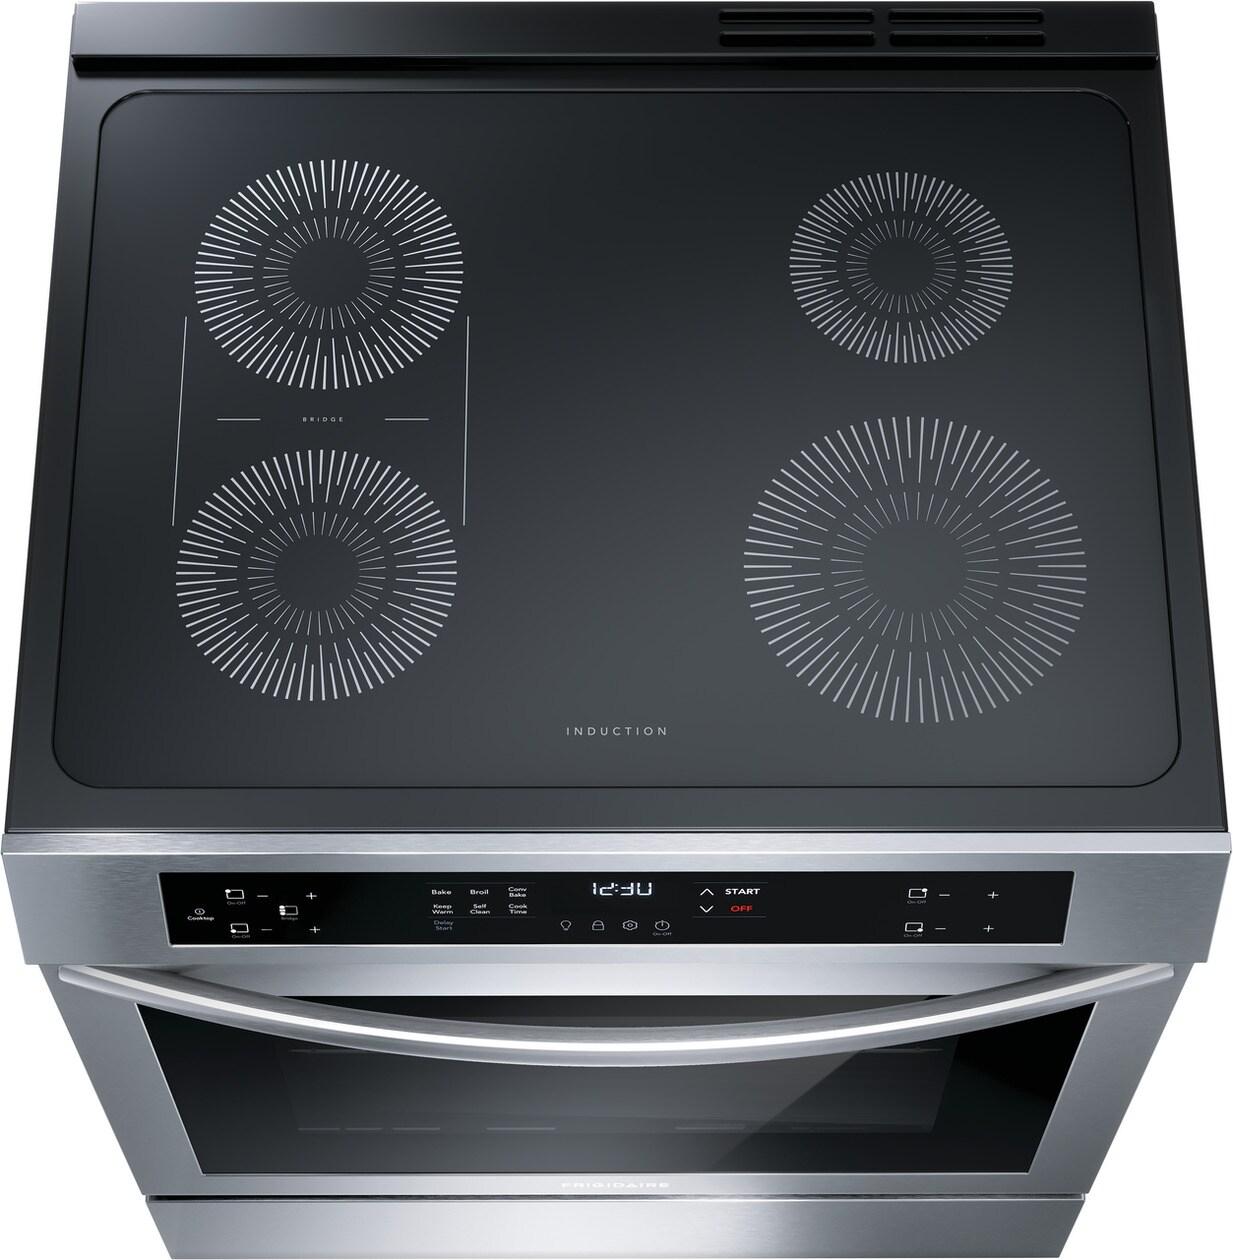 Frigidaire 30" Front Control Induction Range with Convection Bake